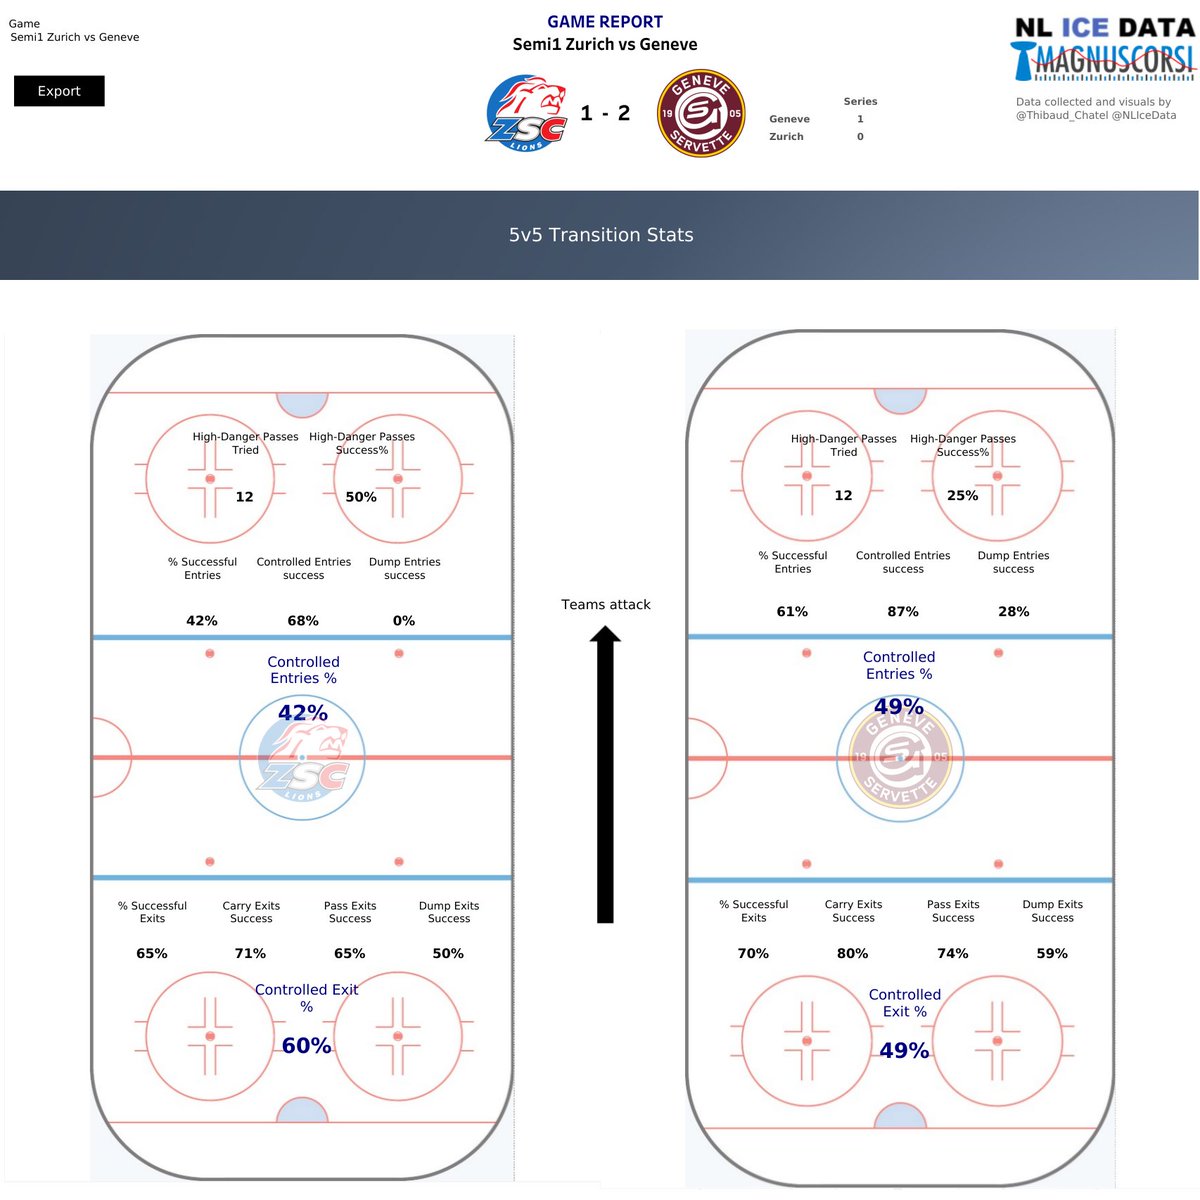  Transition Report 1/2After an easy 1st period for ZSC in terms of Zone Exits, Geneva forechecked better. Zürich still ends with 60% controlled exit, in line with their 59% this season.It was harder for Geneva: 49% controlled Exits (59% too this season)